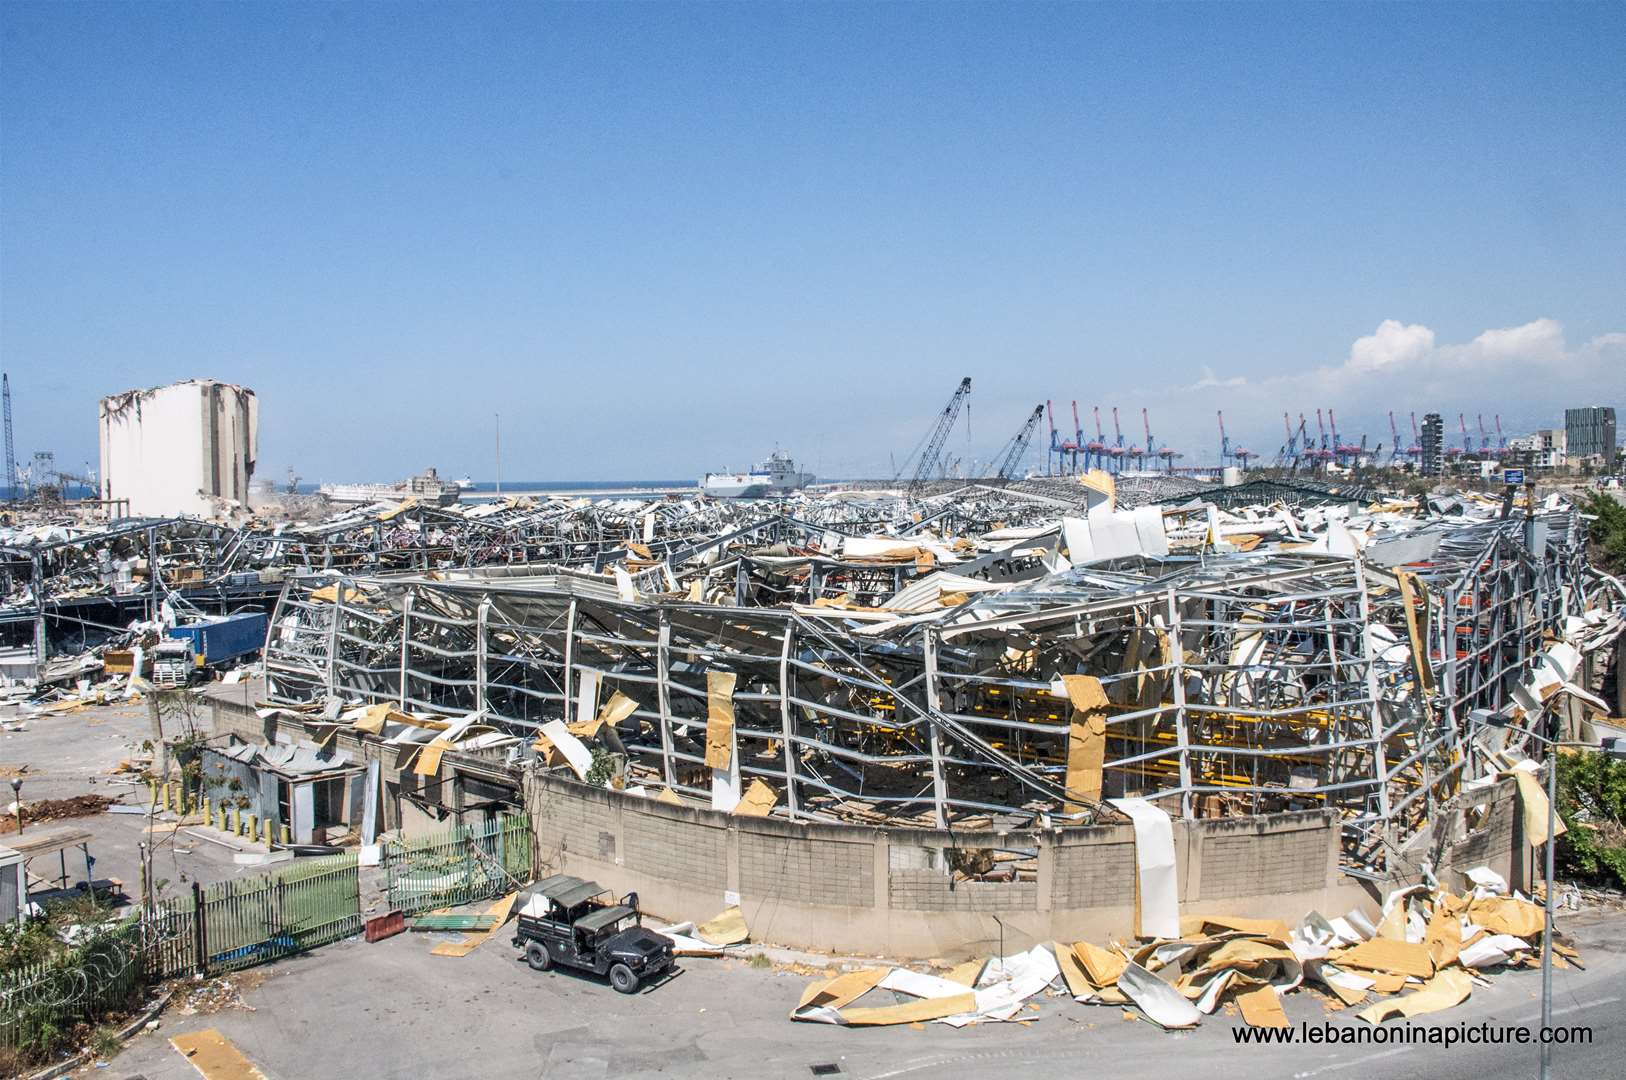 The port area where their used to be big refrigerators, all destroyed because of the Beirut Port Explosion